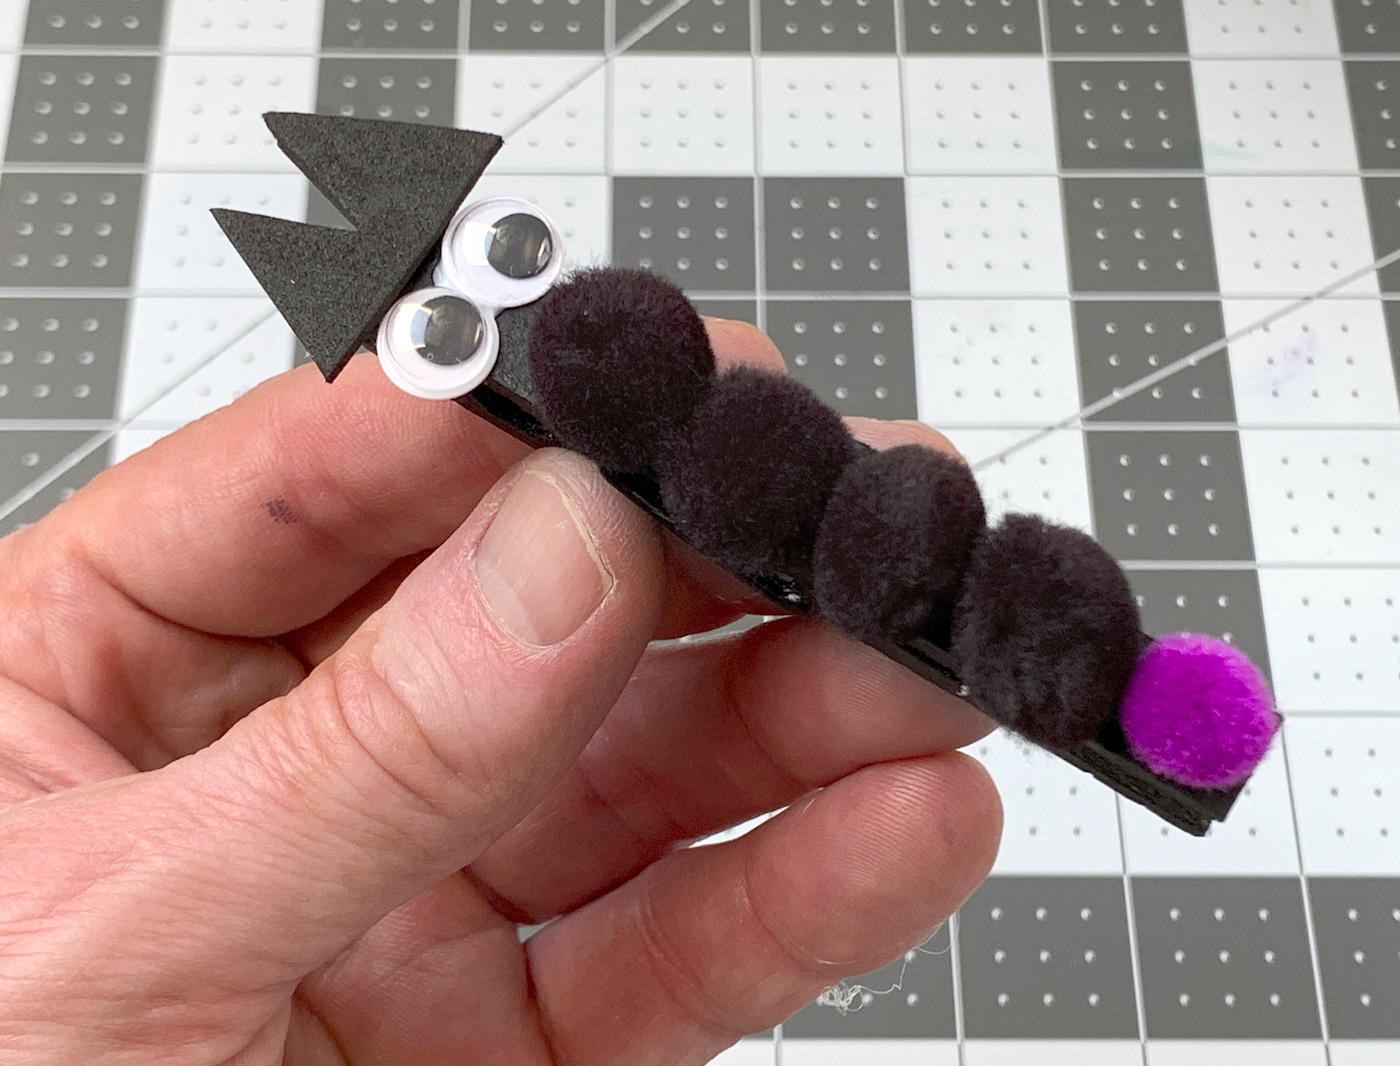 Gluing ears, eyes, and pom poms onto the clothespin